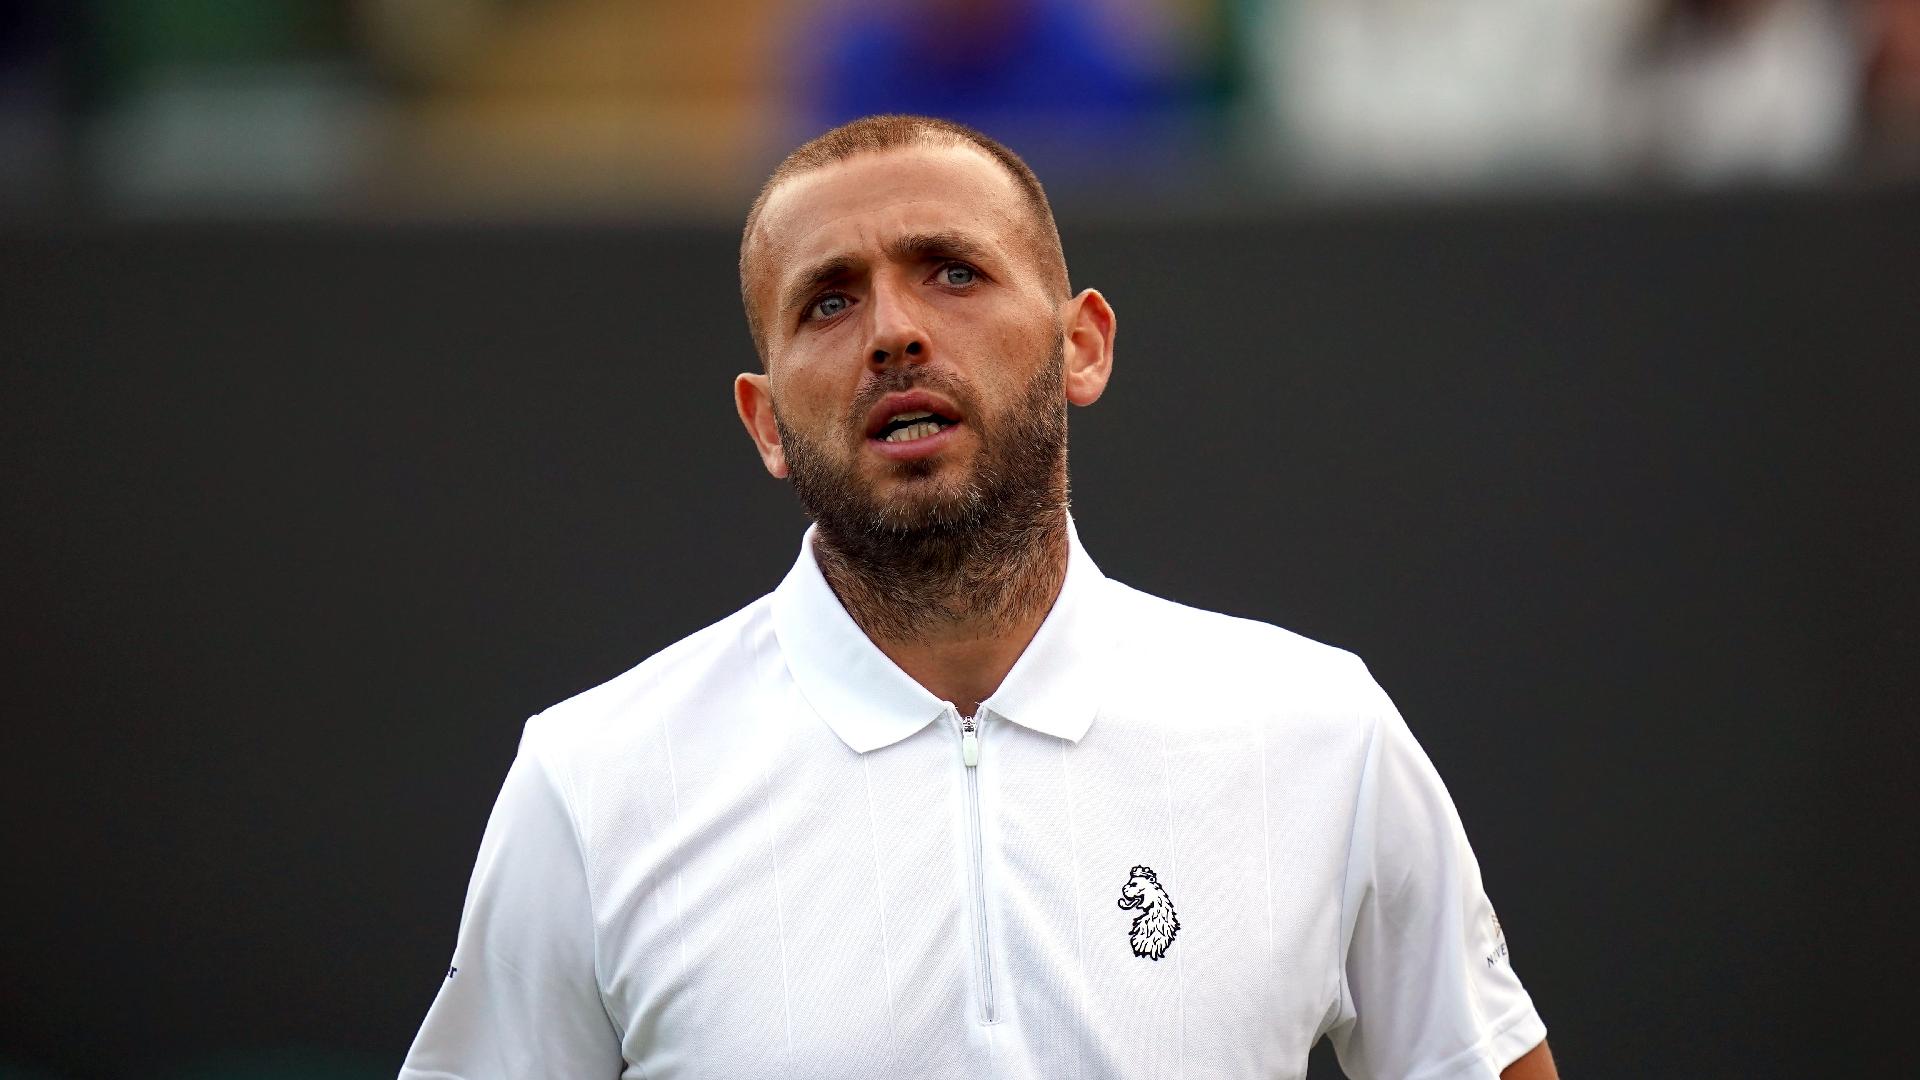 Dan Evans suffers another straight sets defeat on clay